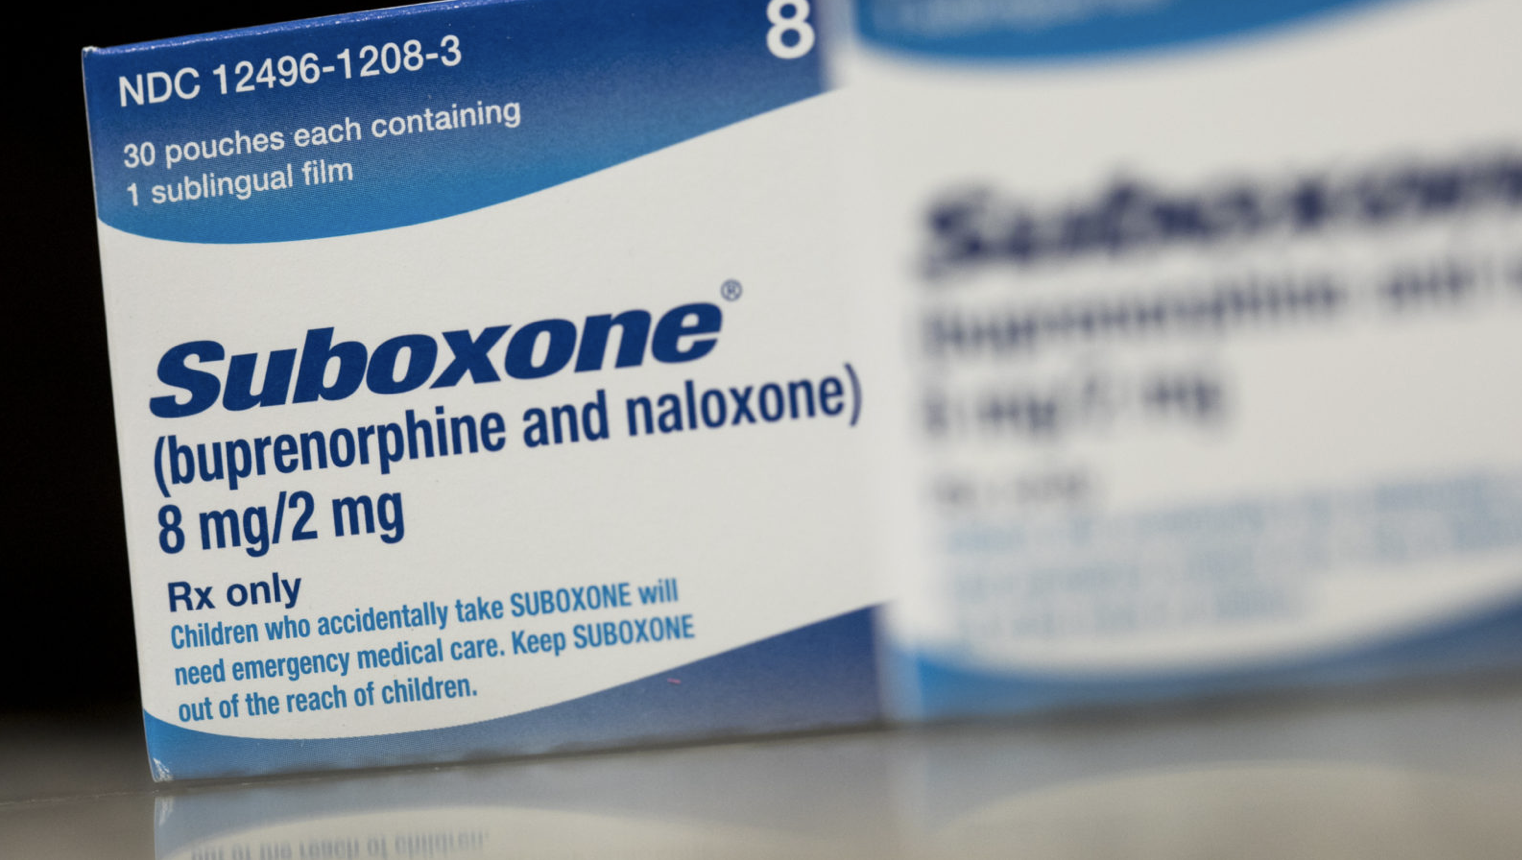 Looking for Suboxone Treatment?